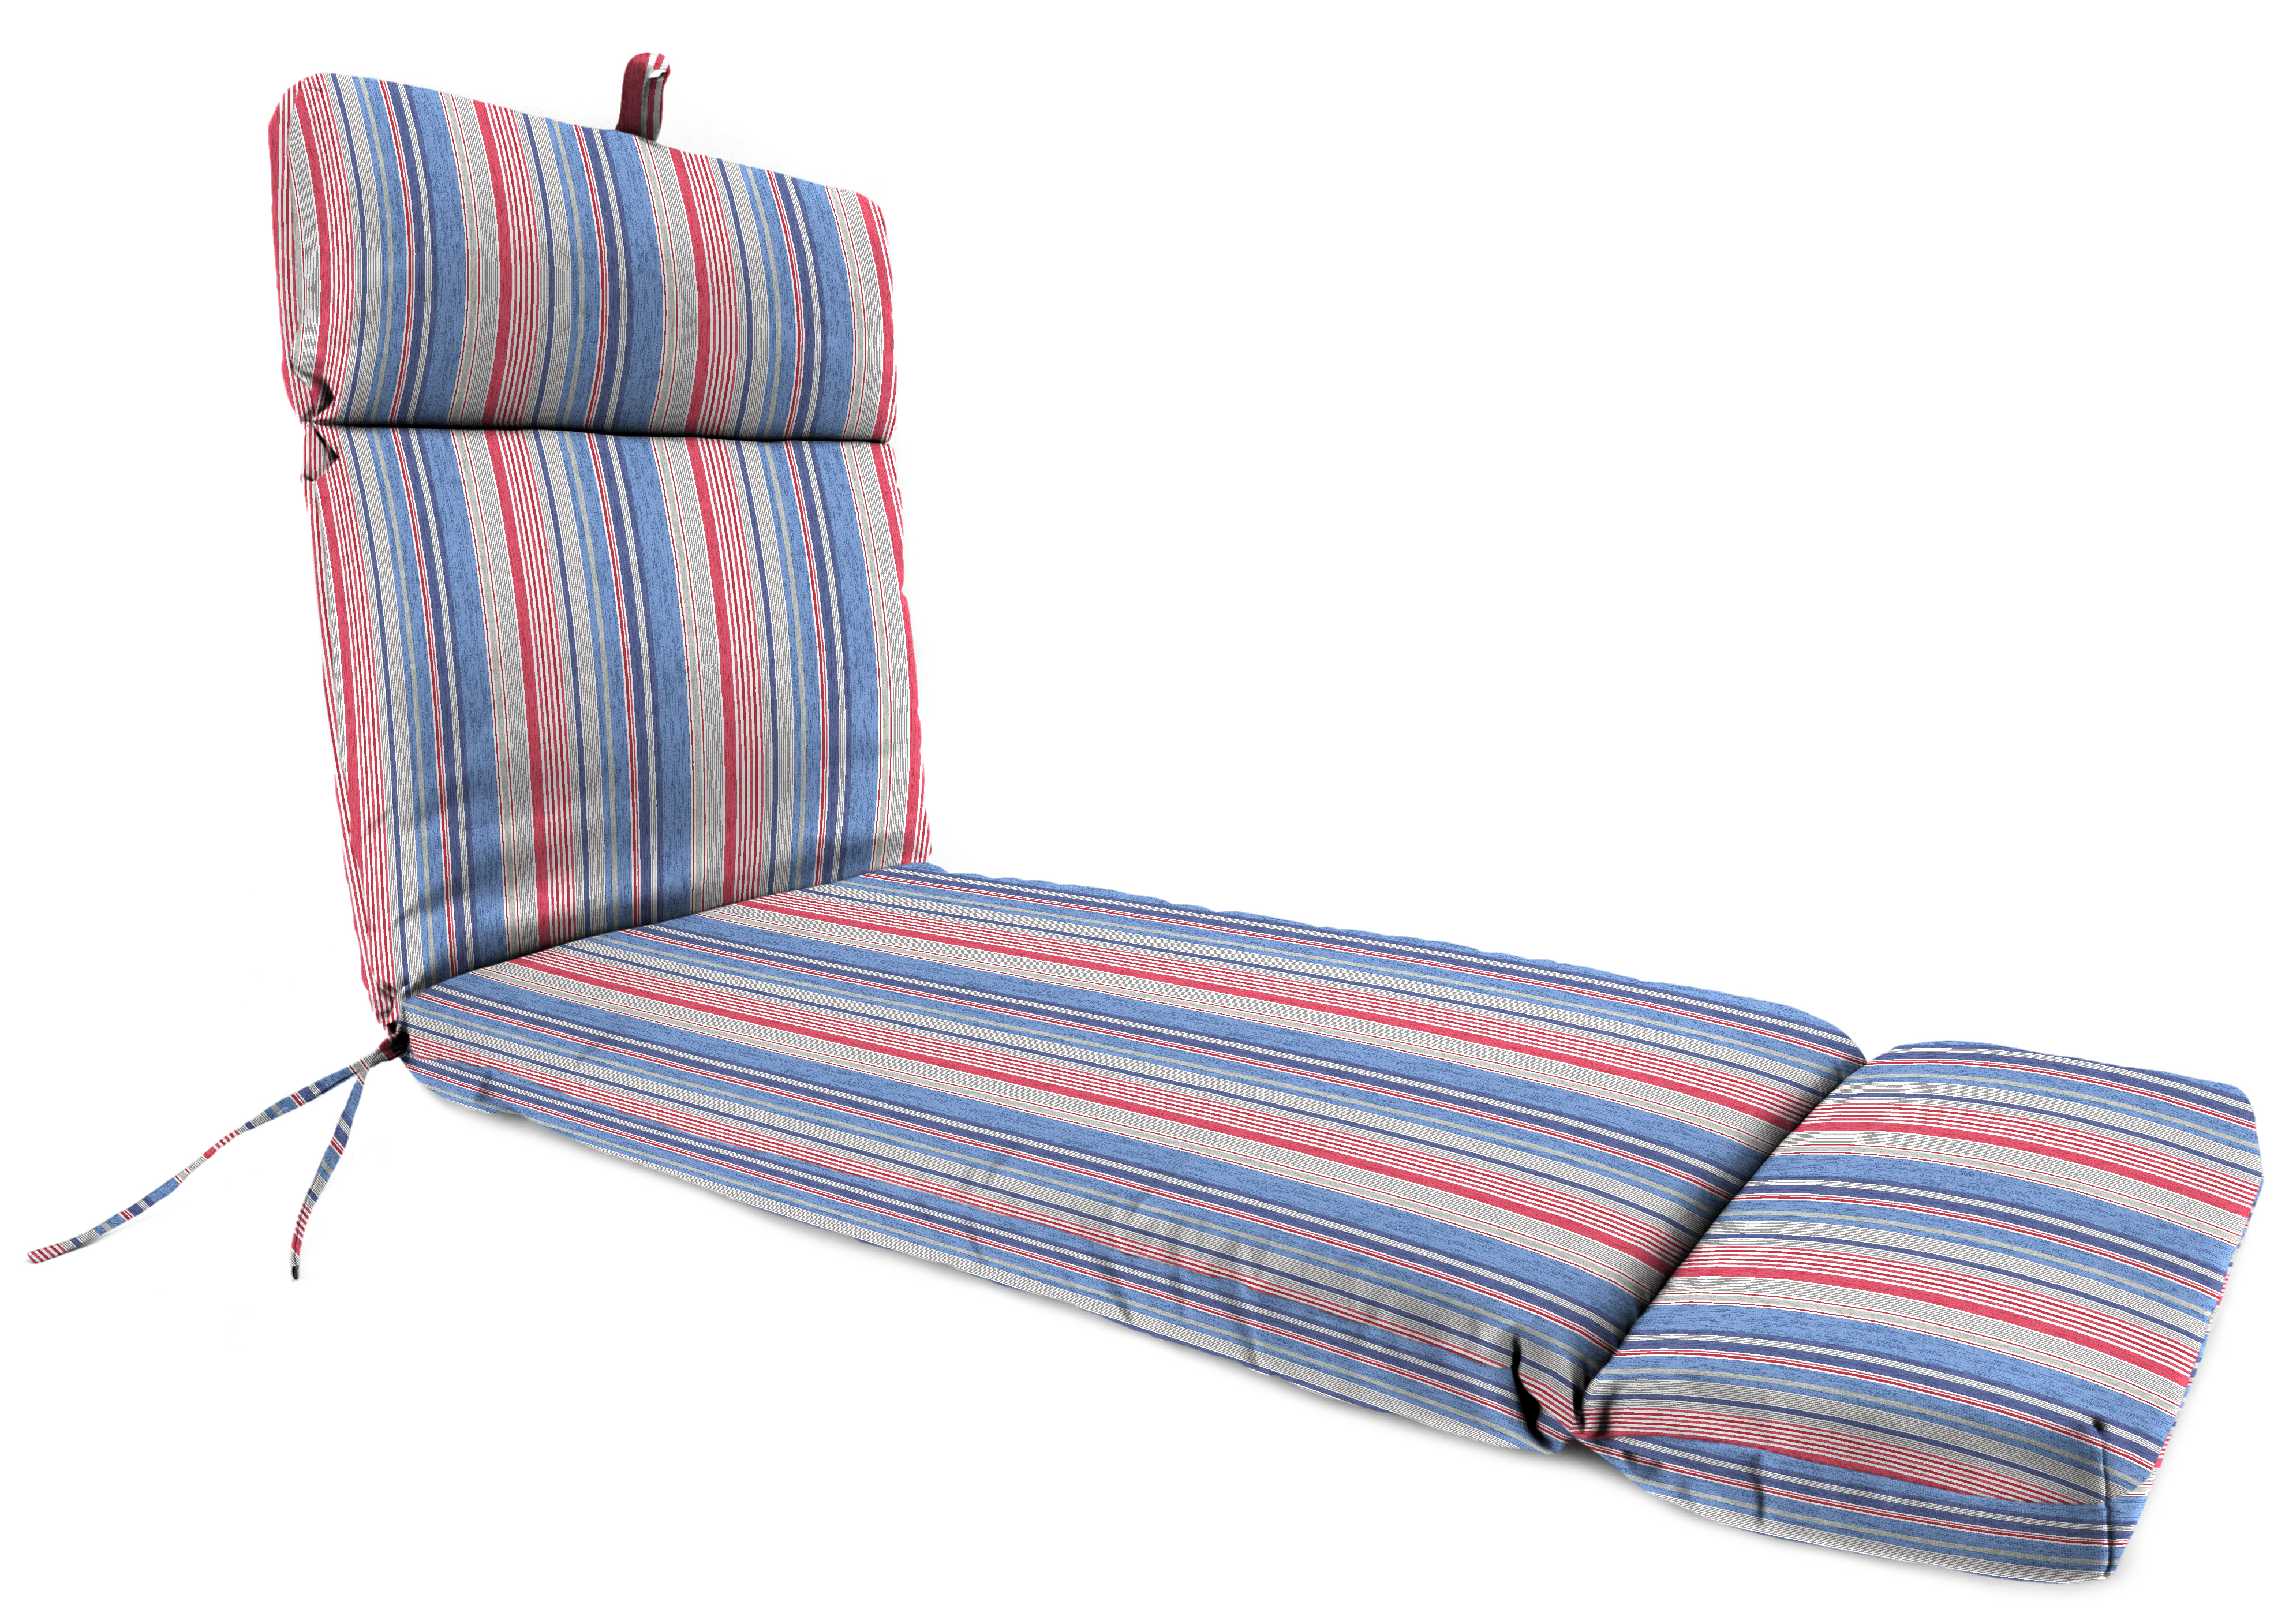 French Edge Patio Chaise Cushion in The Right Stripe Blue Marine